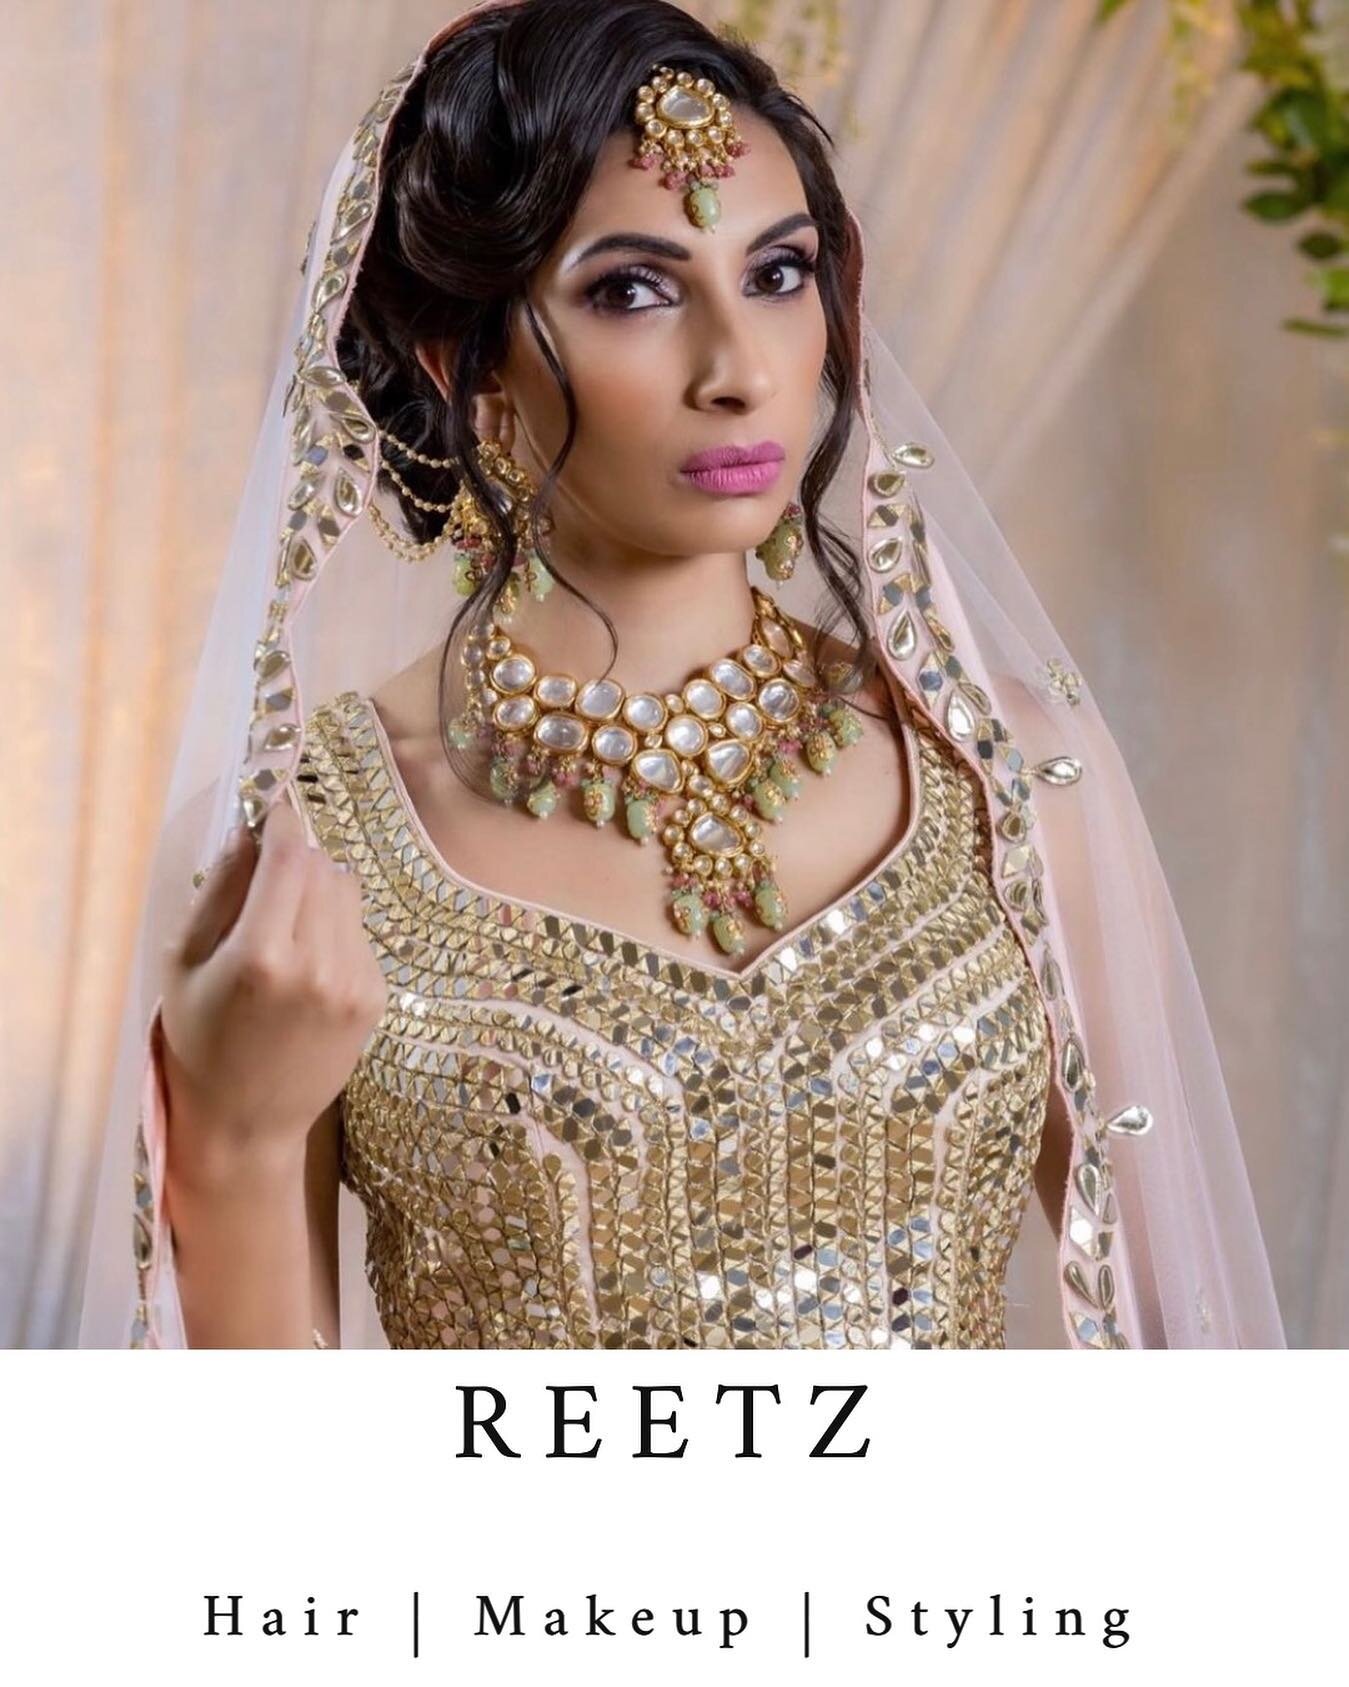 💄 Stylist: REETZ
📍Location: WARWICKSHIRE - available to travel ----------------------------------------------------------------------------------
To BOOK 👉🏽 Email us at promakeuplondonstylists@gmail.com -------------------------------------------